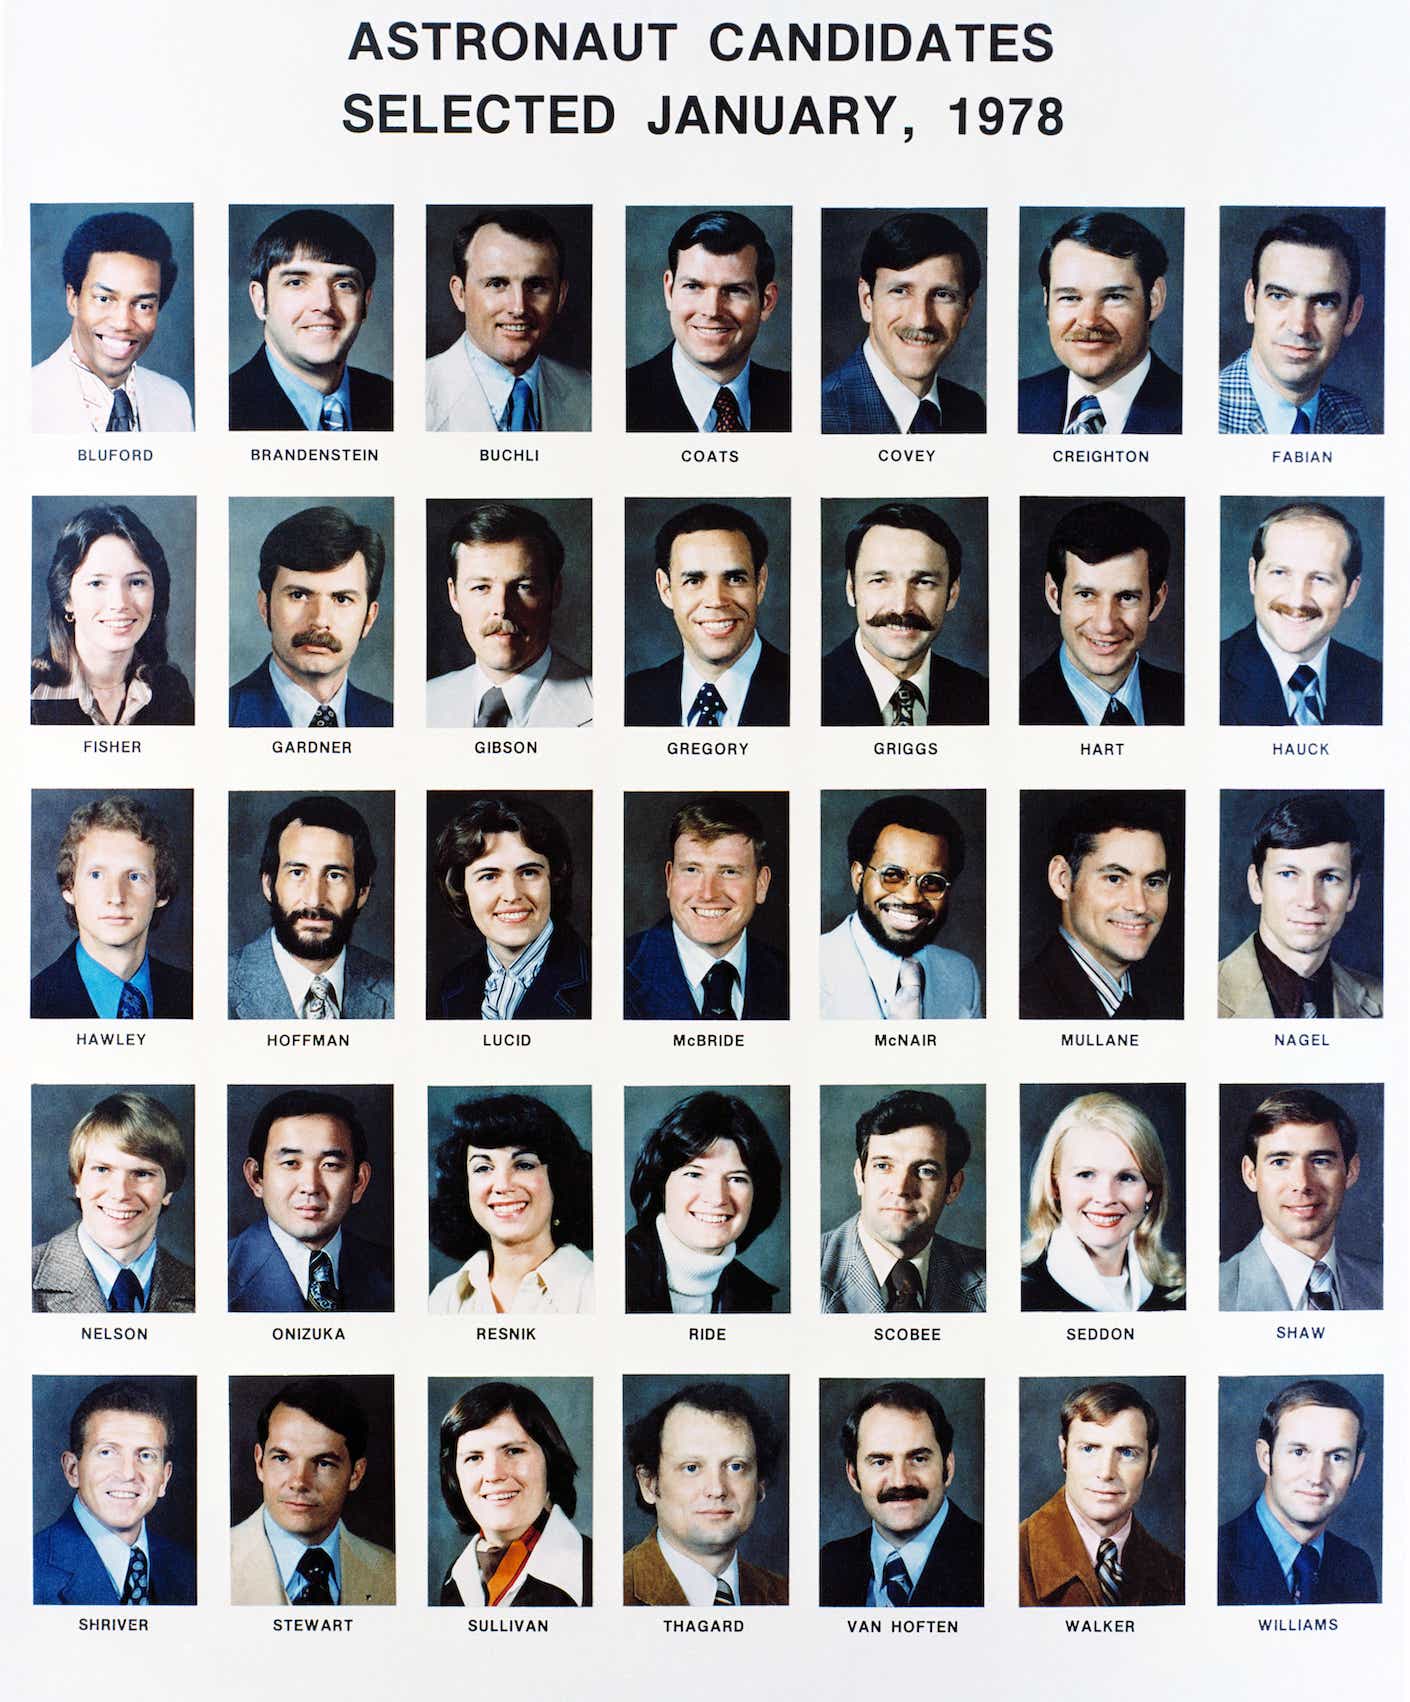 This is a montage of the individual portraits of the 35-member 1978 class of astronaut candidates. 